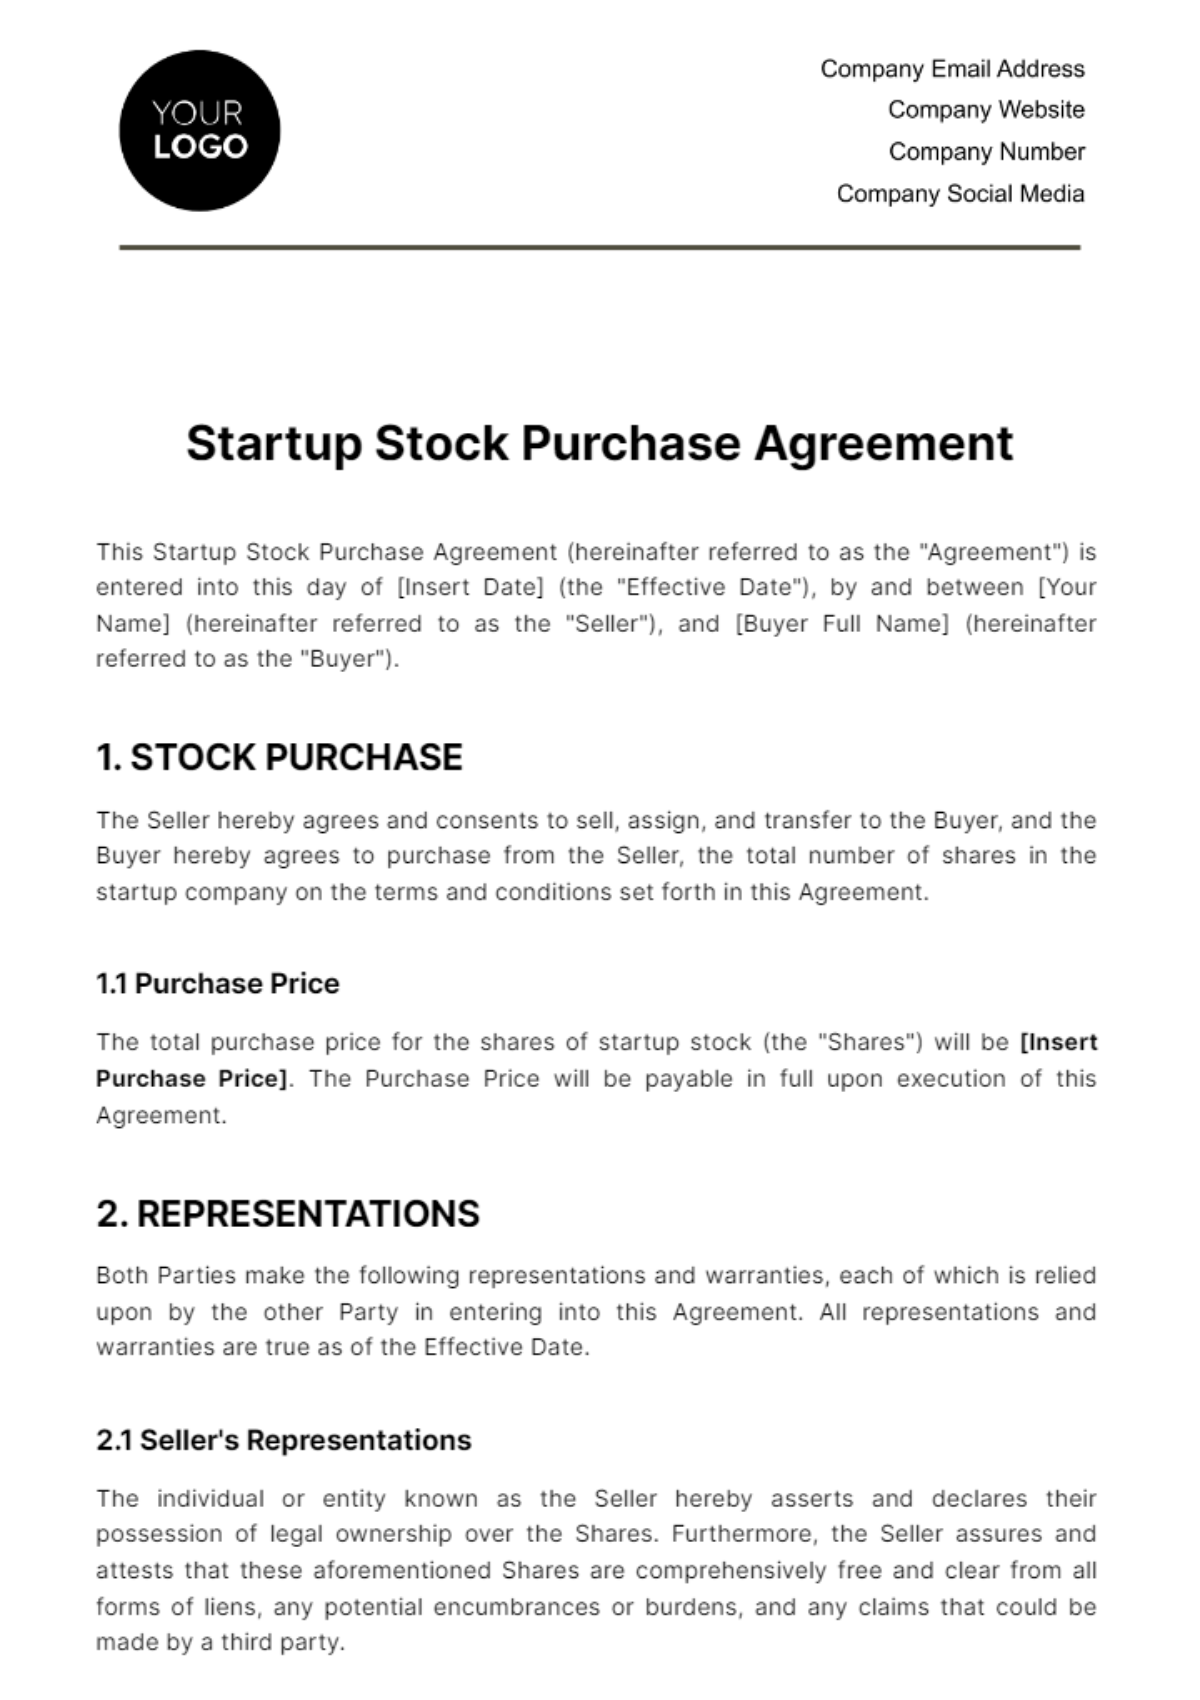 Free Startup Stock Purchase Agreement Template